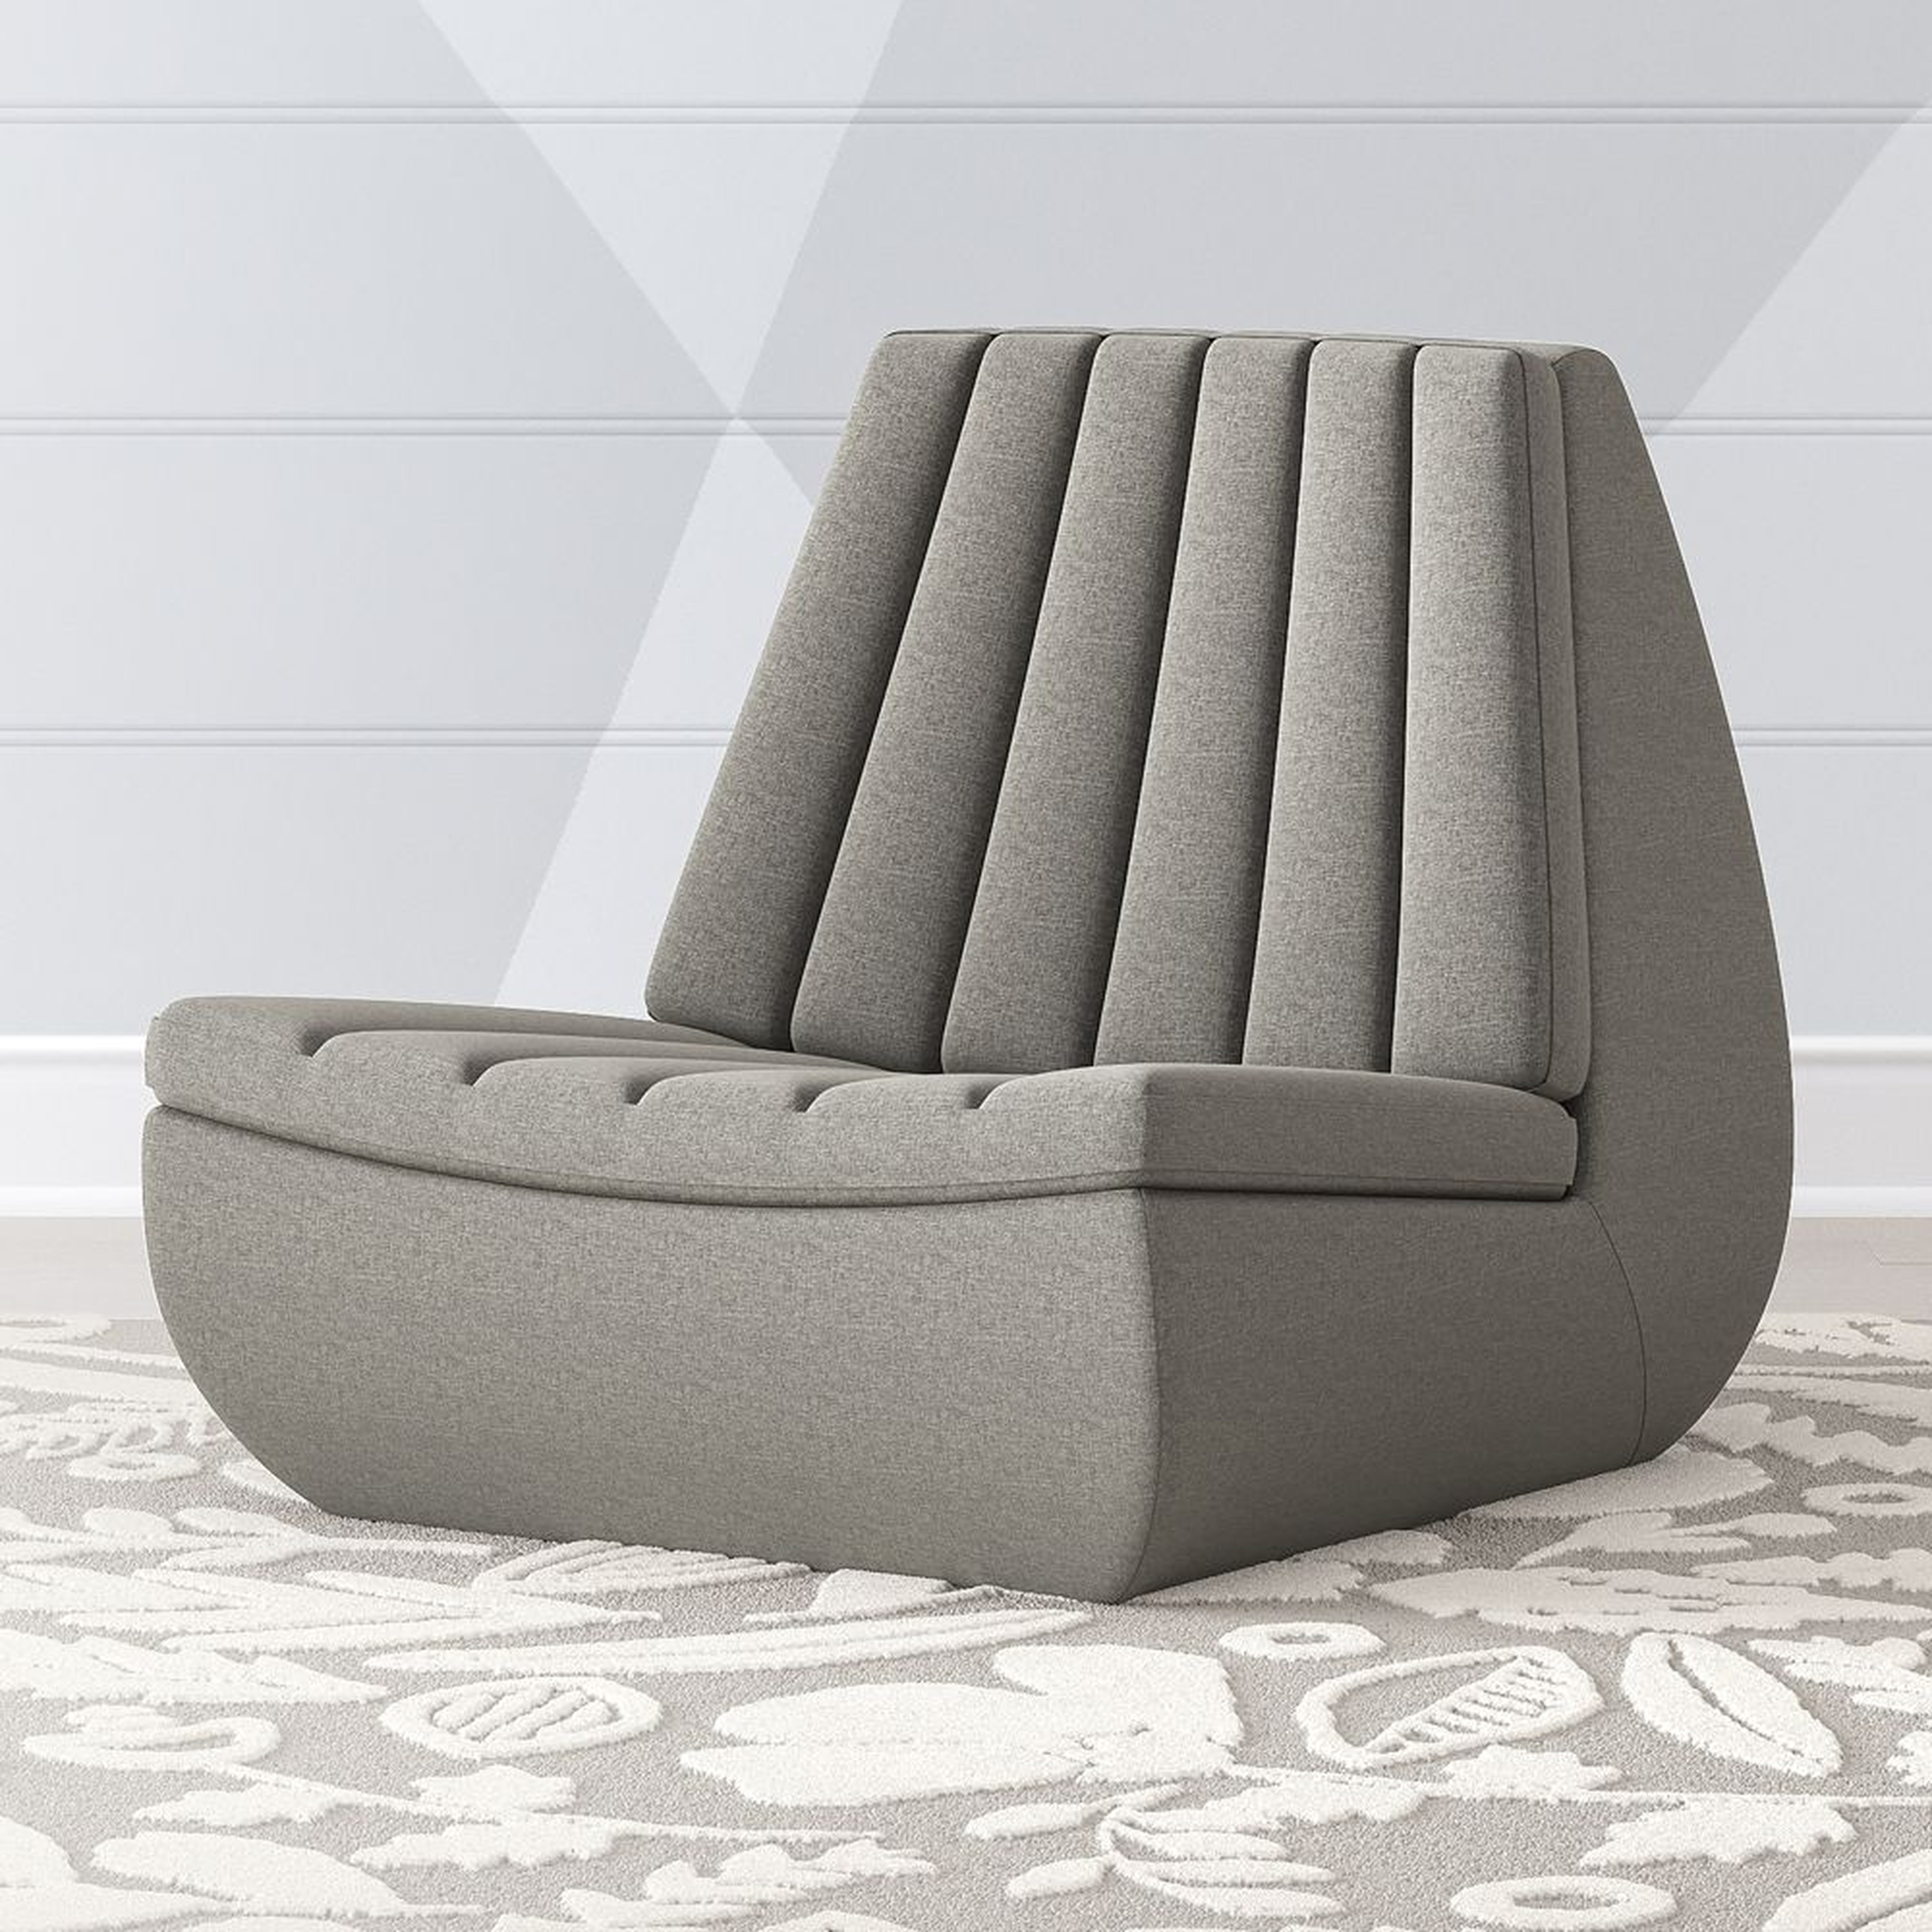 Contour Swivel Lounge Chair - Crate and Barrel